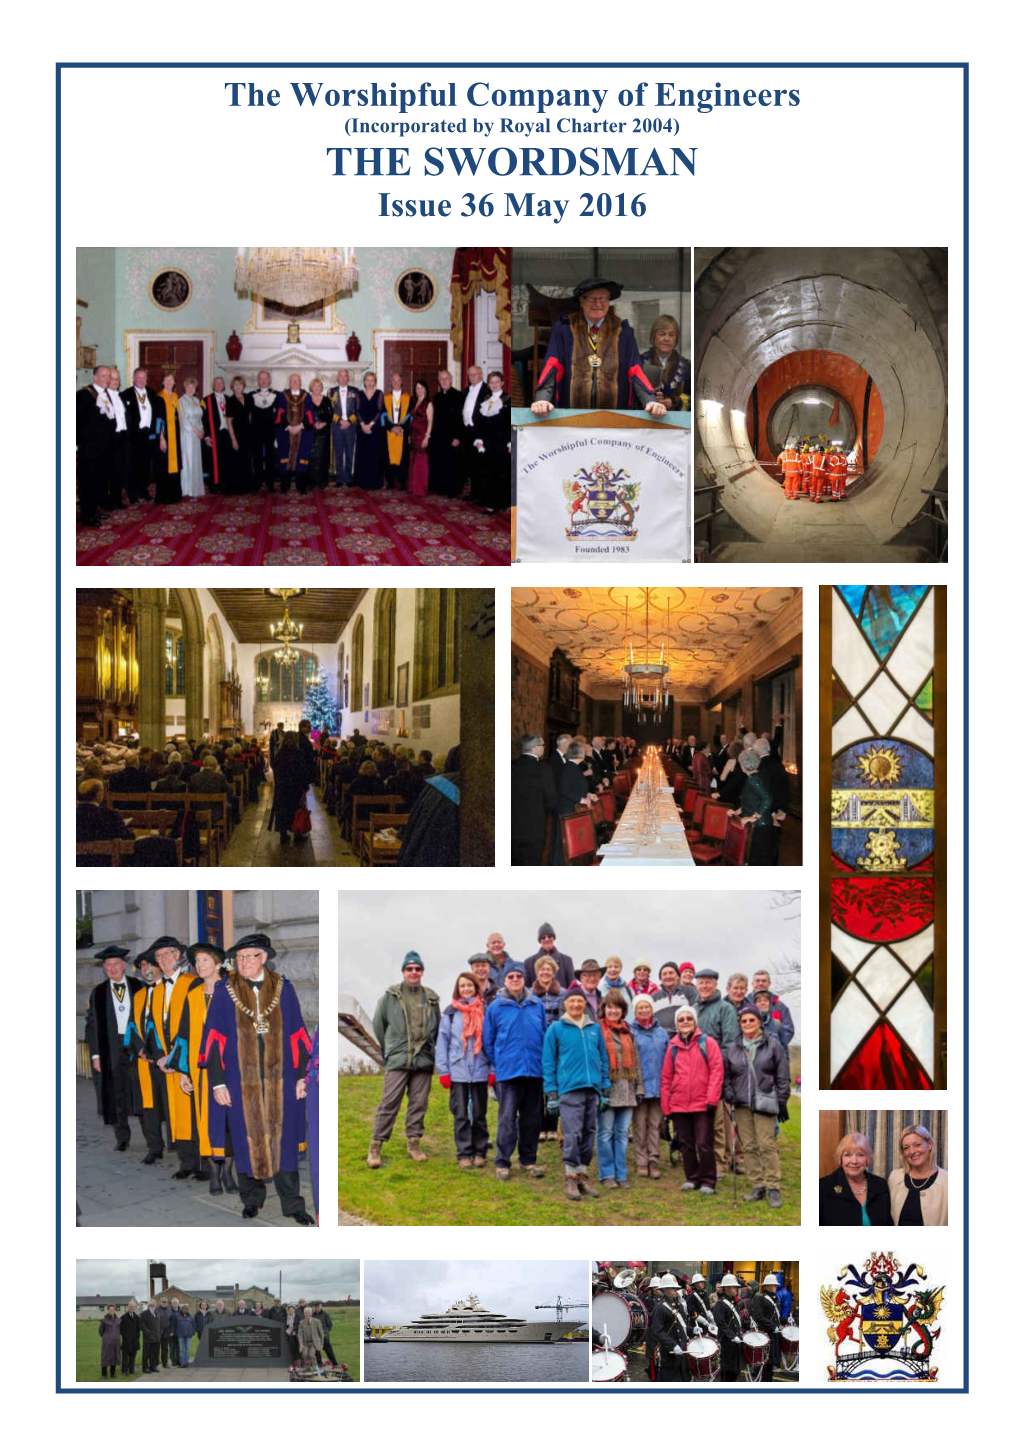 The Swordsman Issue 36 the Worshipful Company of Engineers (Incorporated by Royal Charter 2004) the SWORDSMAN Issue 36 May 2016